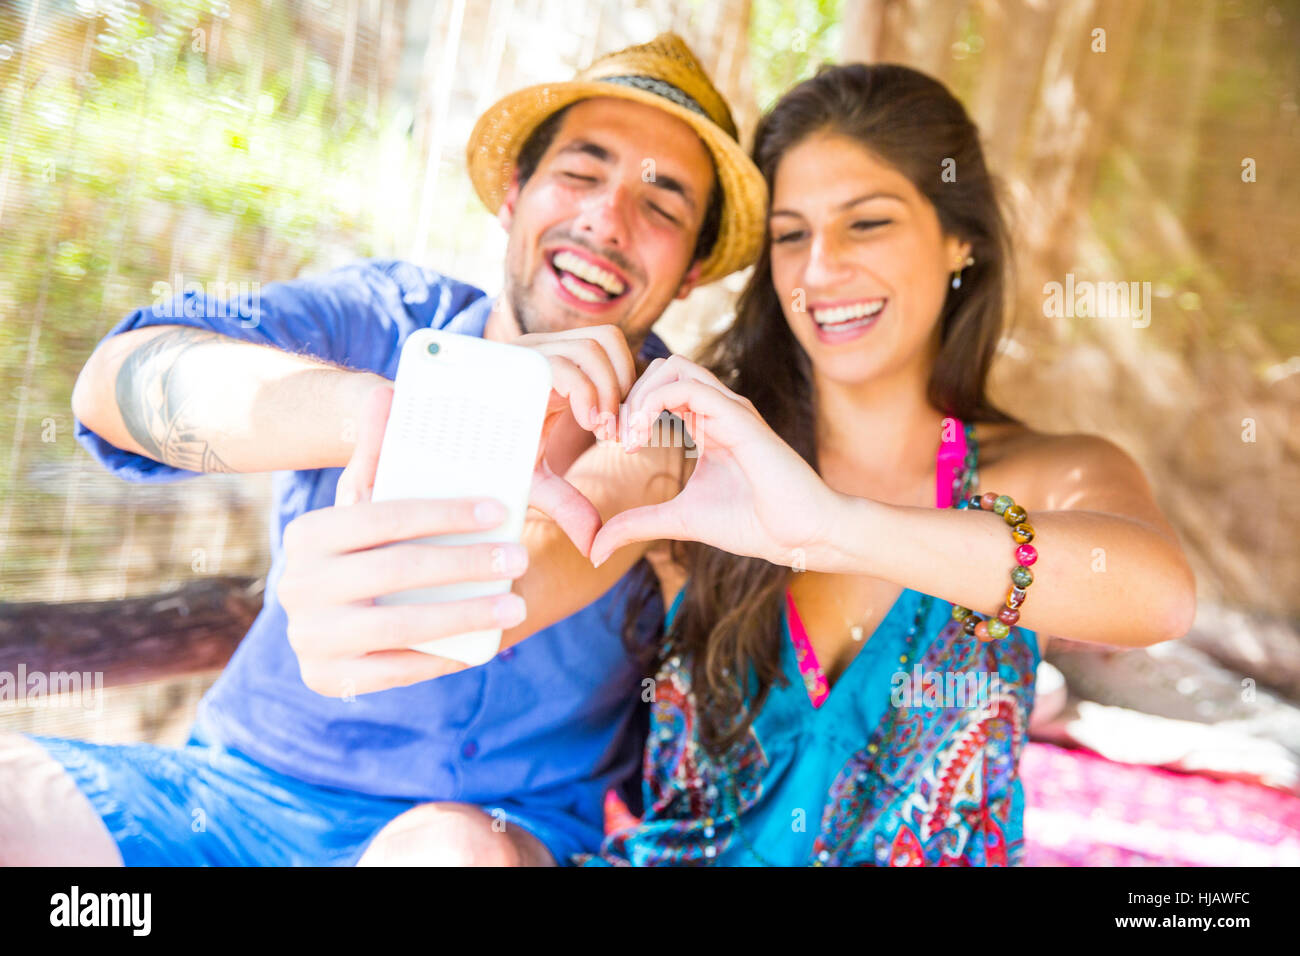 Couple making heart shape with hands taking selfie Stock Photo